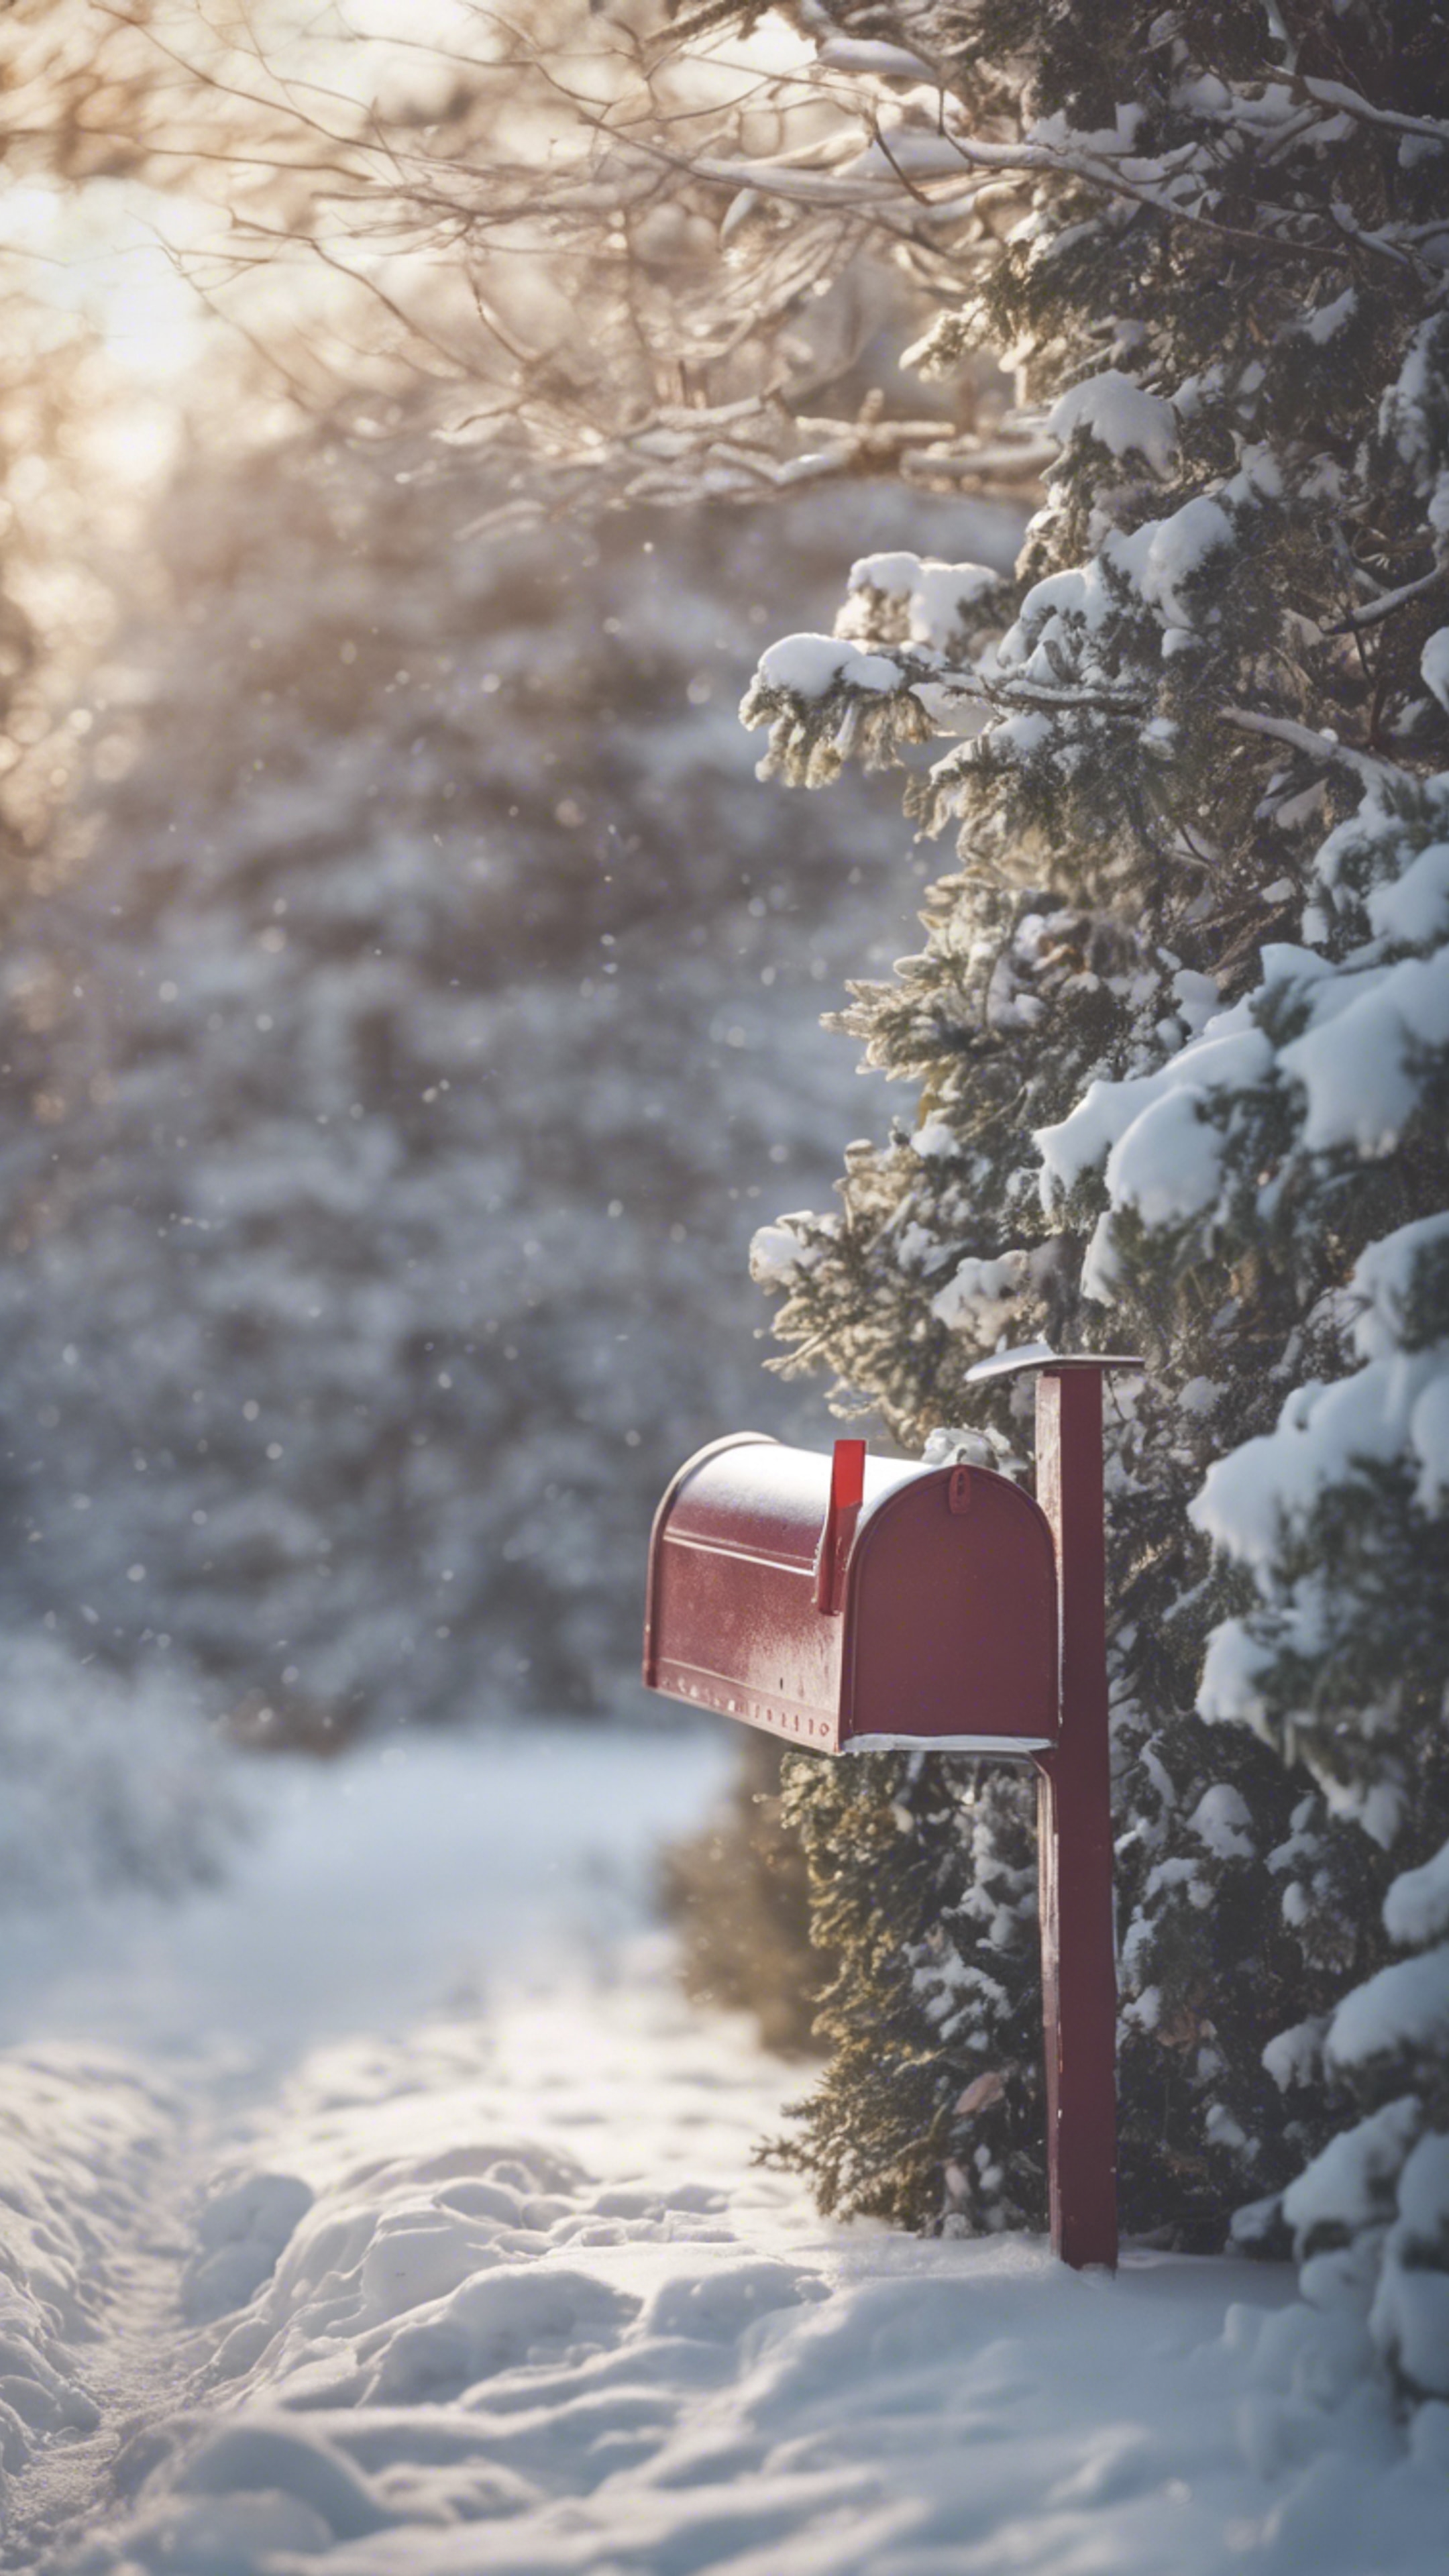 A lone mailbox standing forlorn at the end of a long, snowy driveway. Тапет[391816613dc64c2ea3f3]